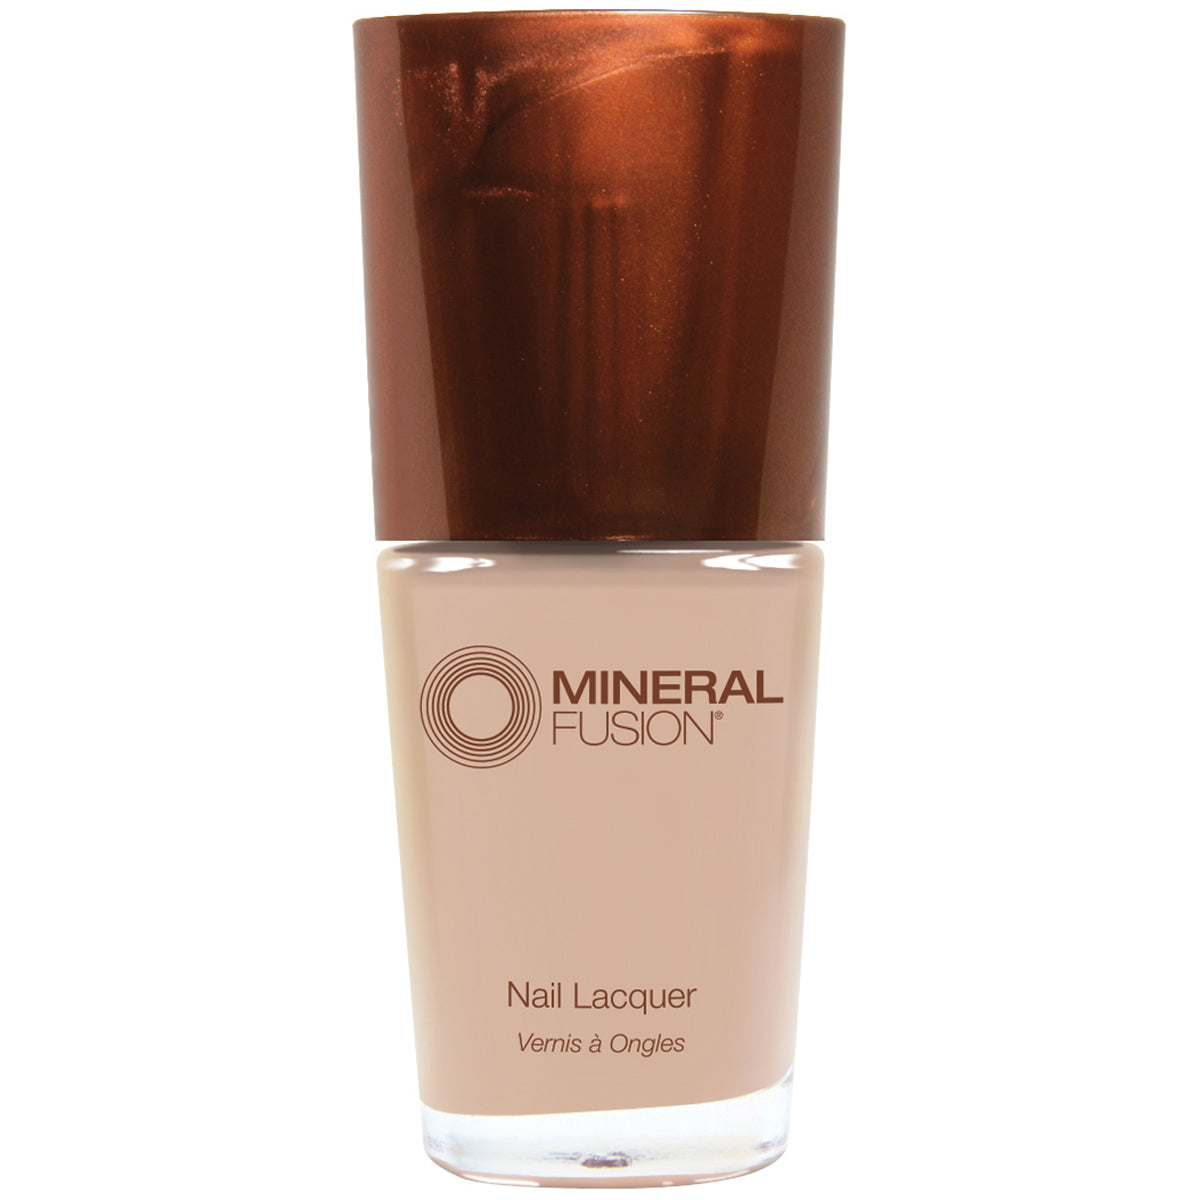 Mineral Fusion - Nail Polish - Barefoot Blush - by Mineral Fusion |ProCare Outlet|